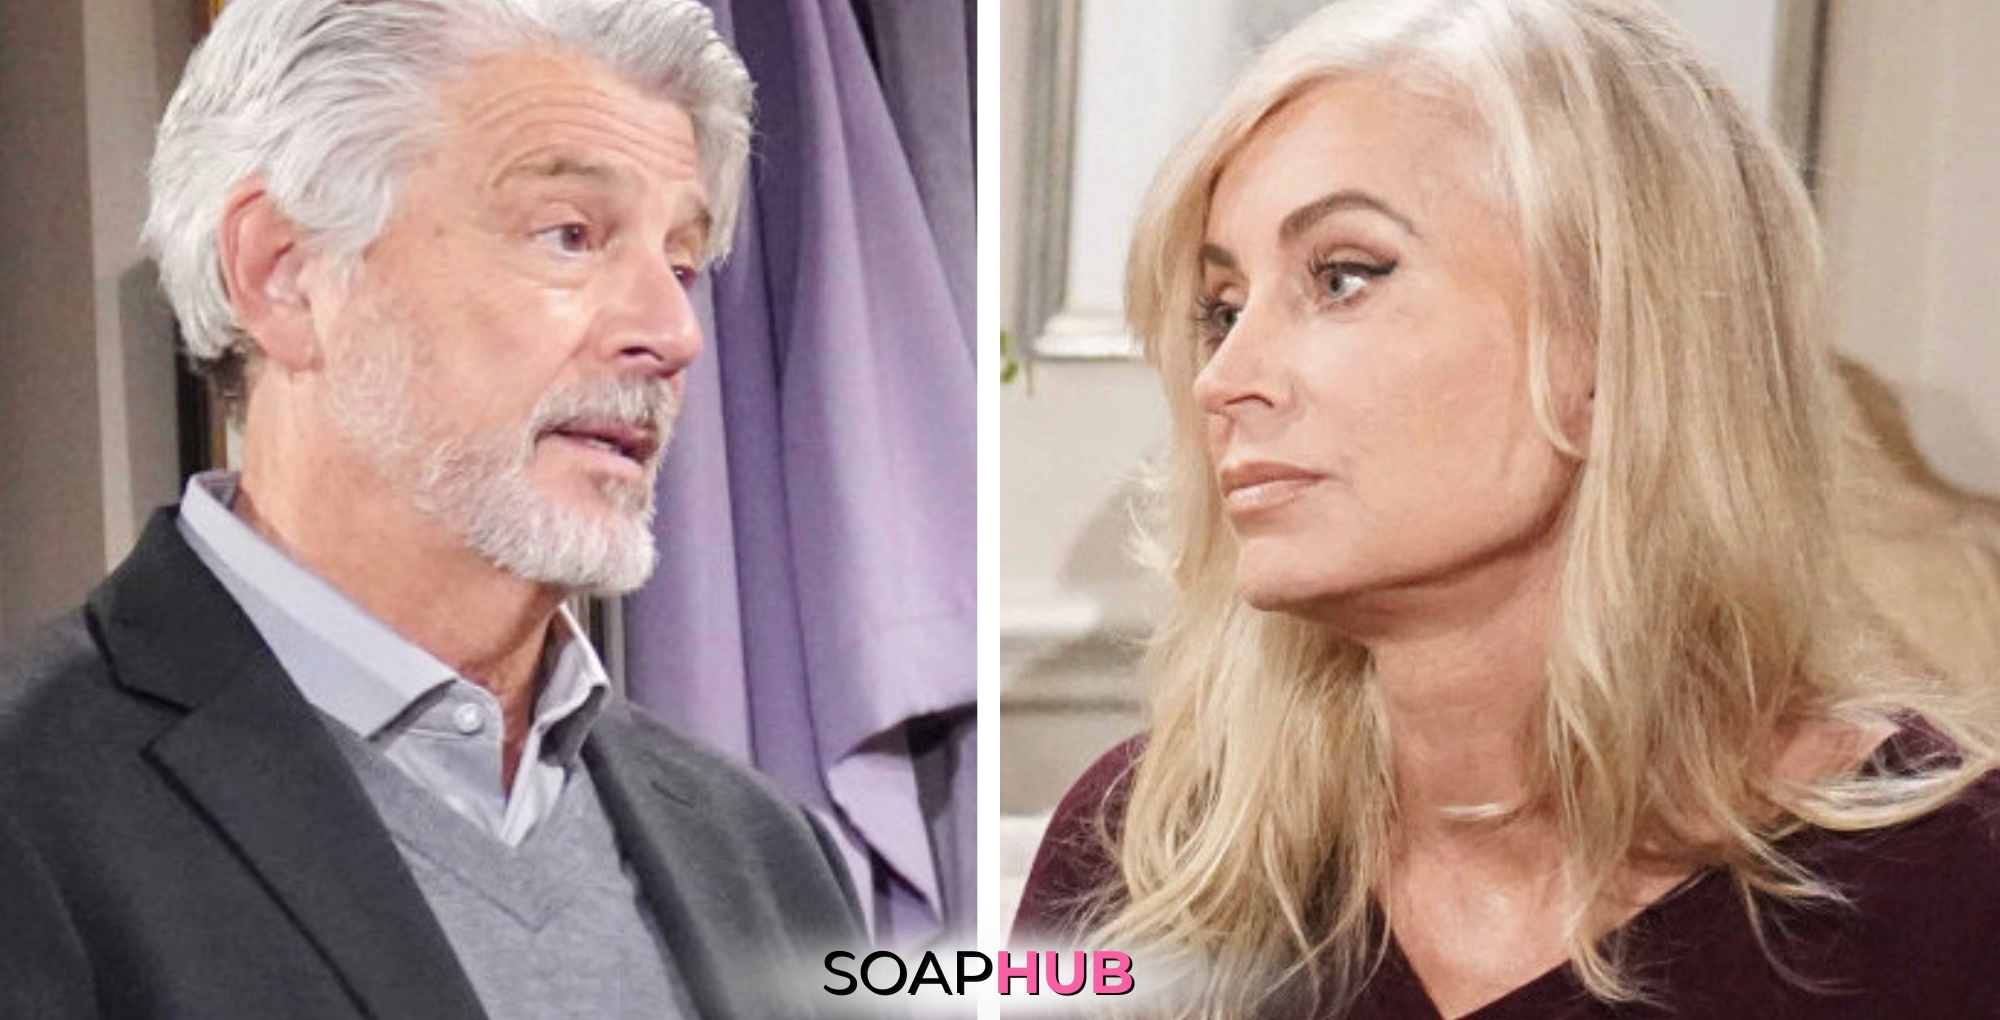 The Young and the Restless spoilers for June 6 feature Alan and Ashley with the Soap Hub logo.